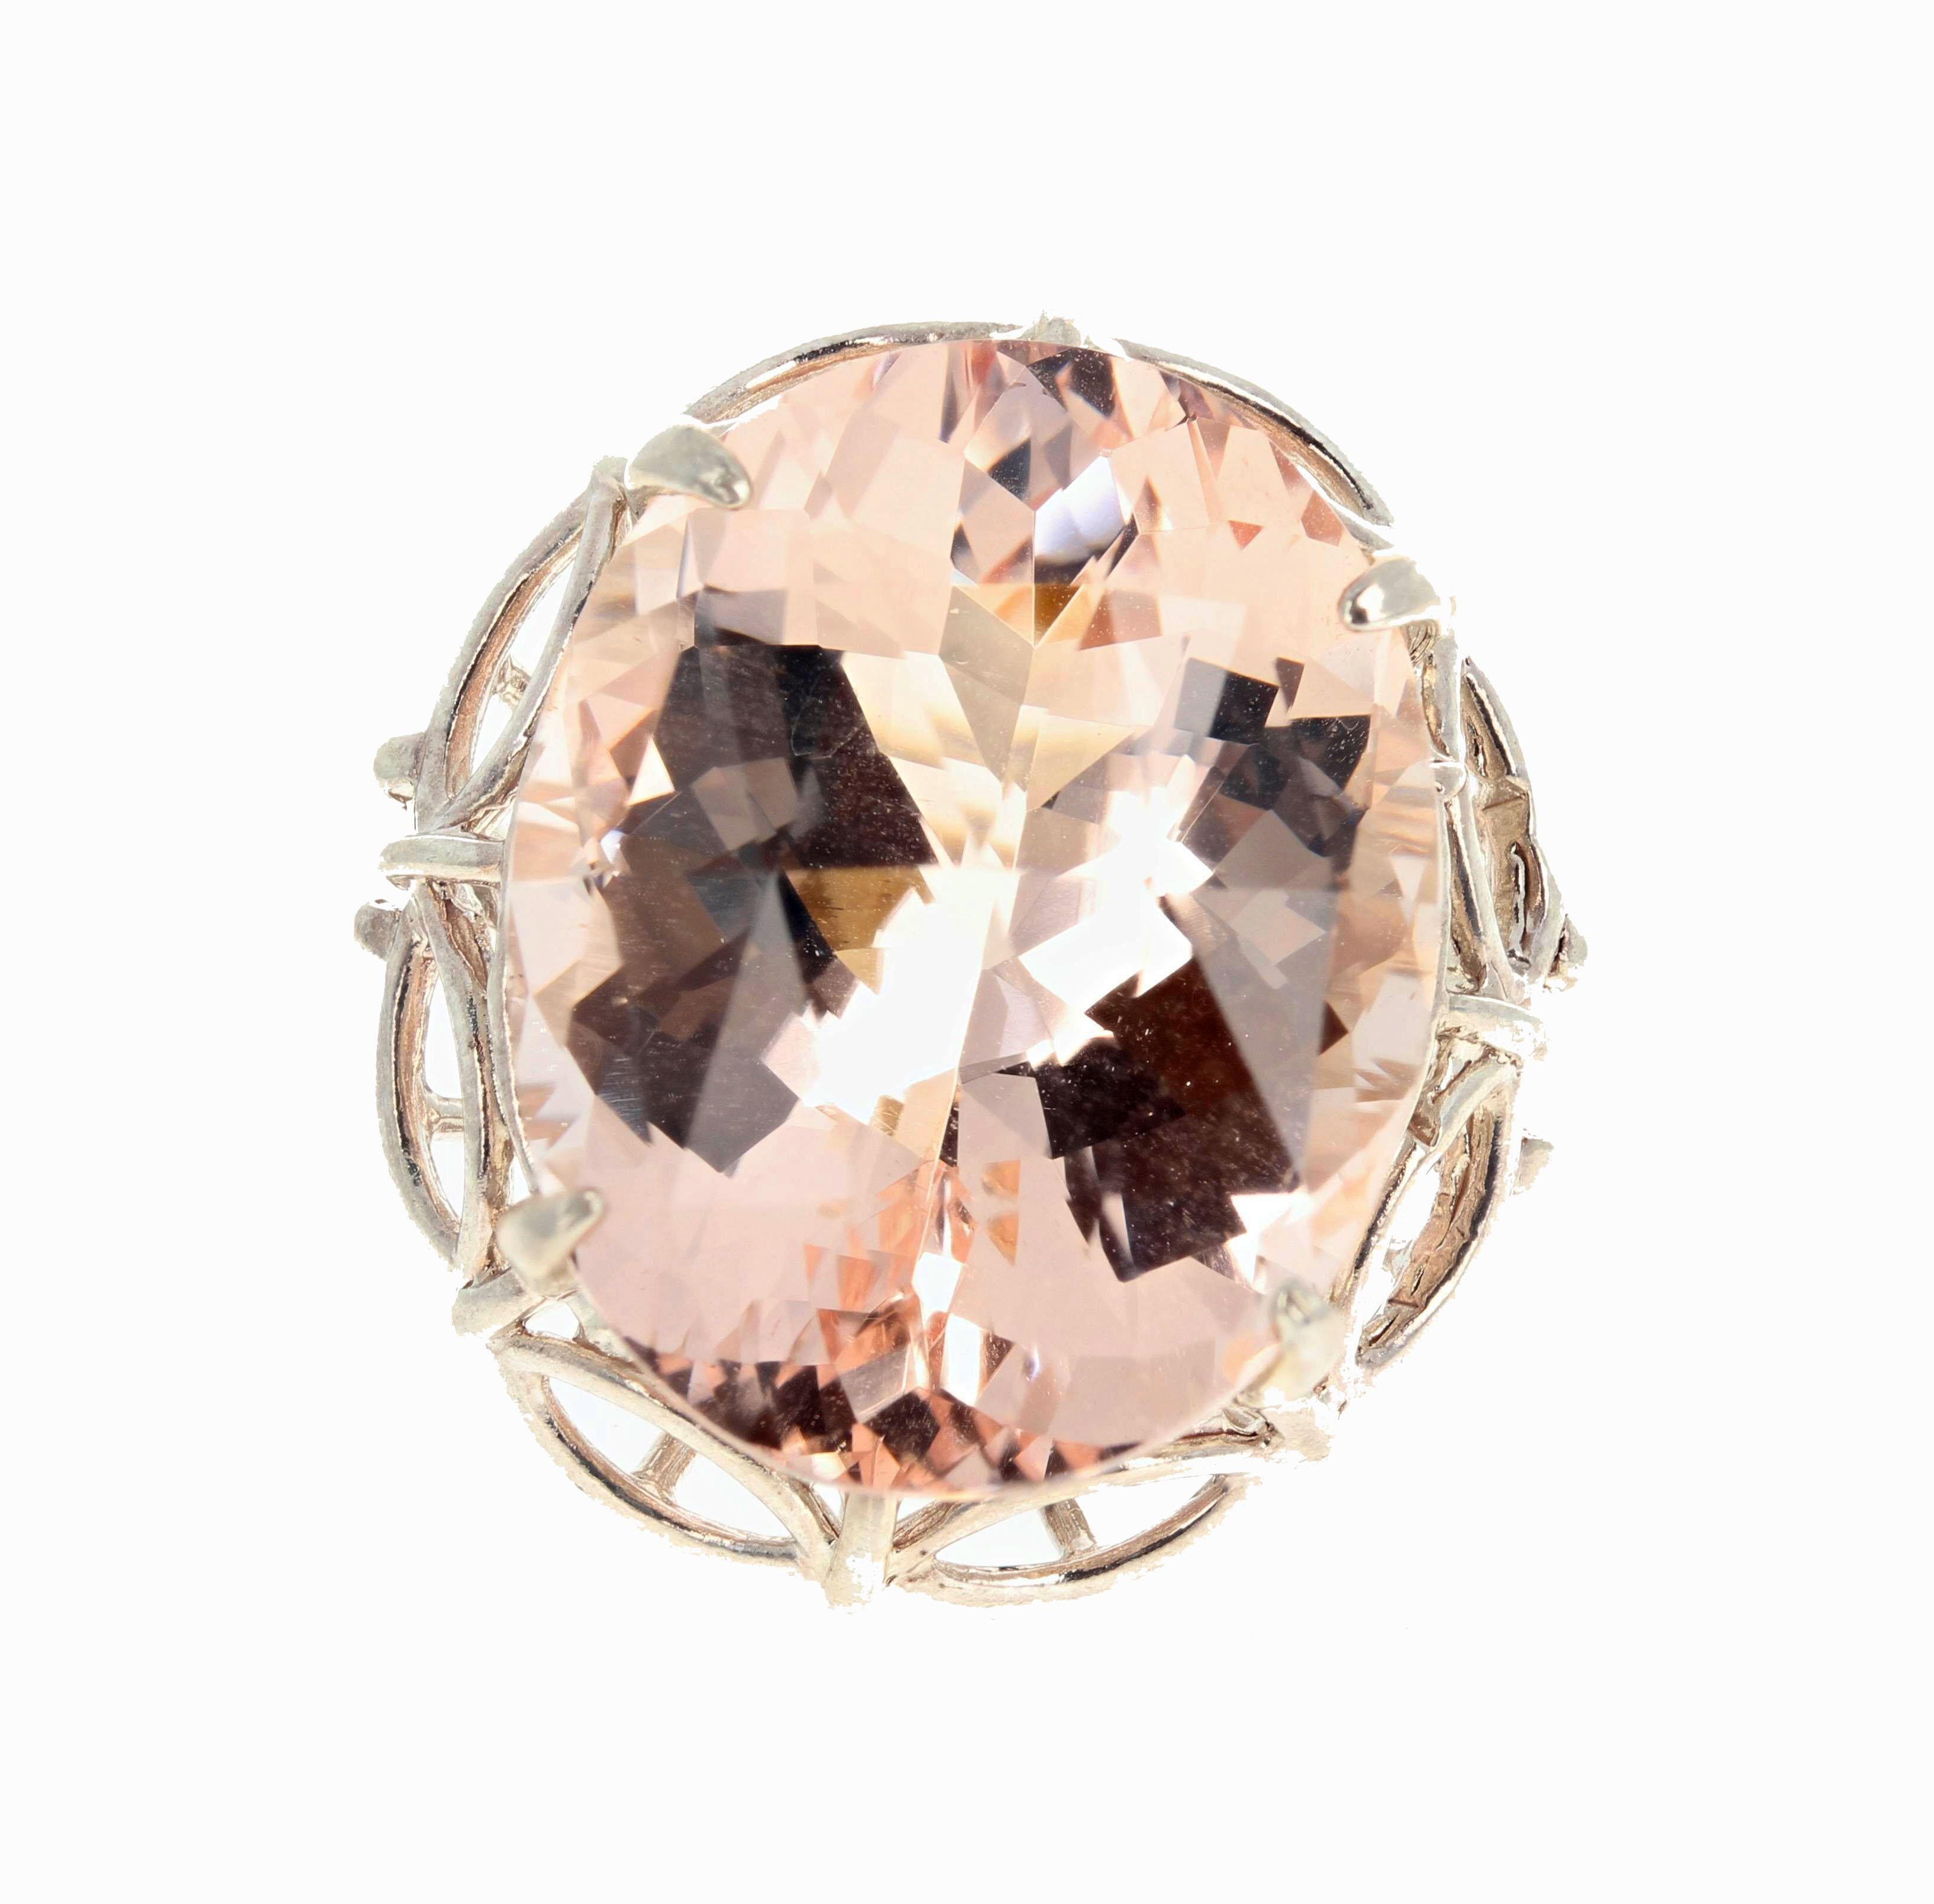 AJD Enormous Glowing Clear 30 Ct. Morganite Sterling Silver Cocktail Ring For Sale 1